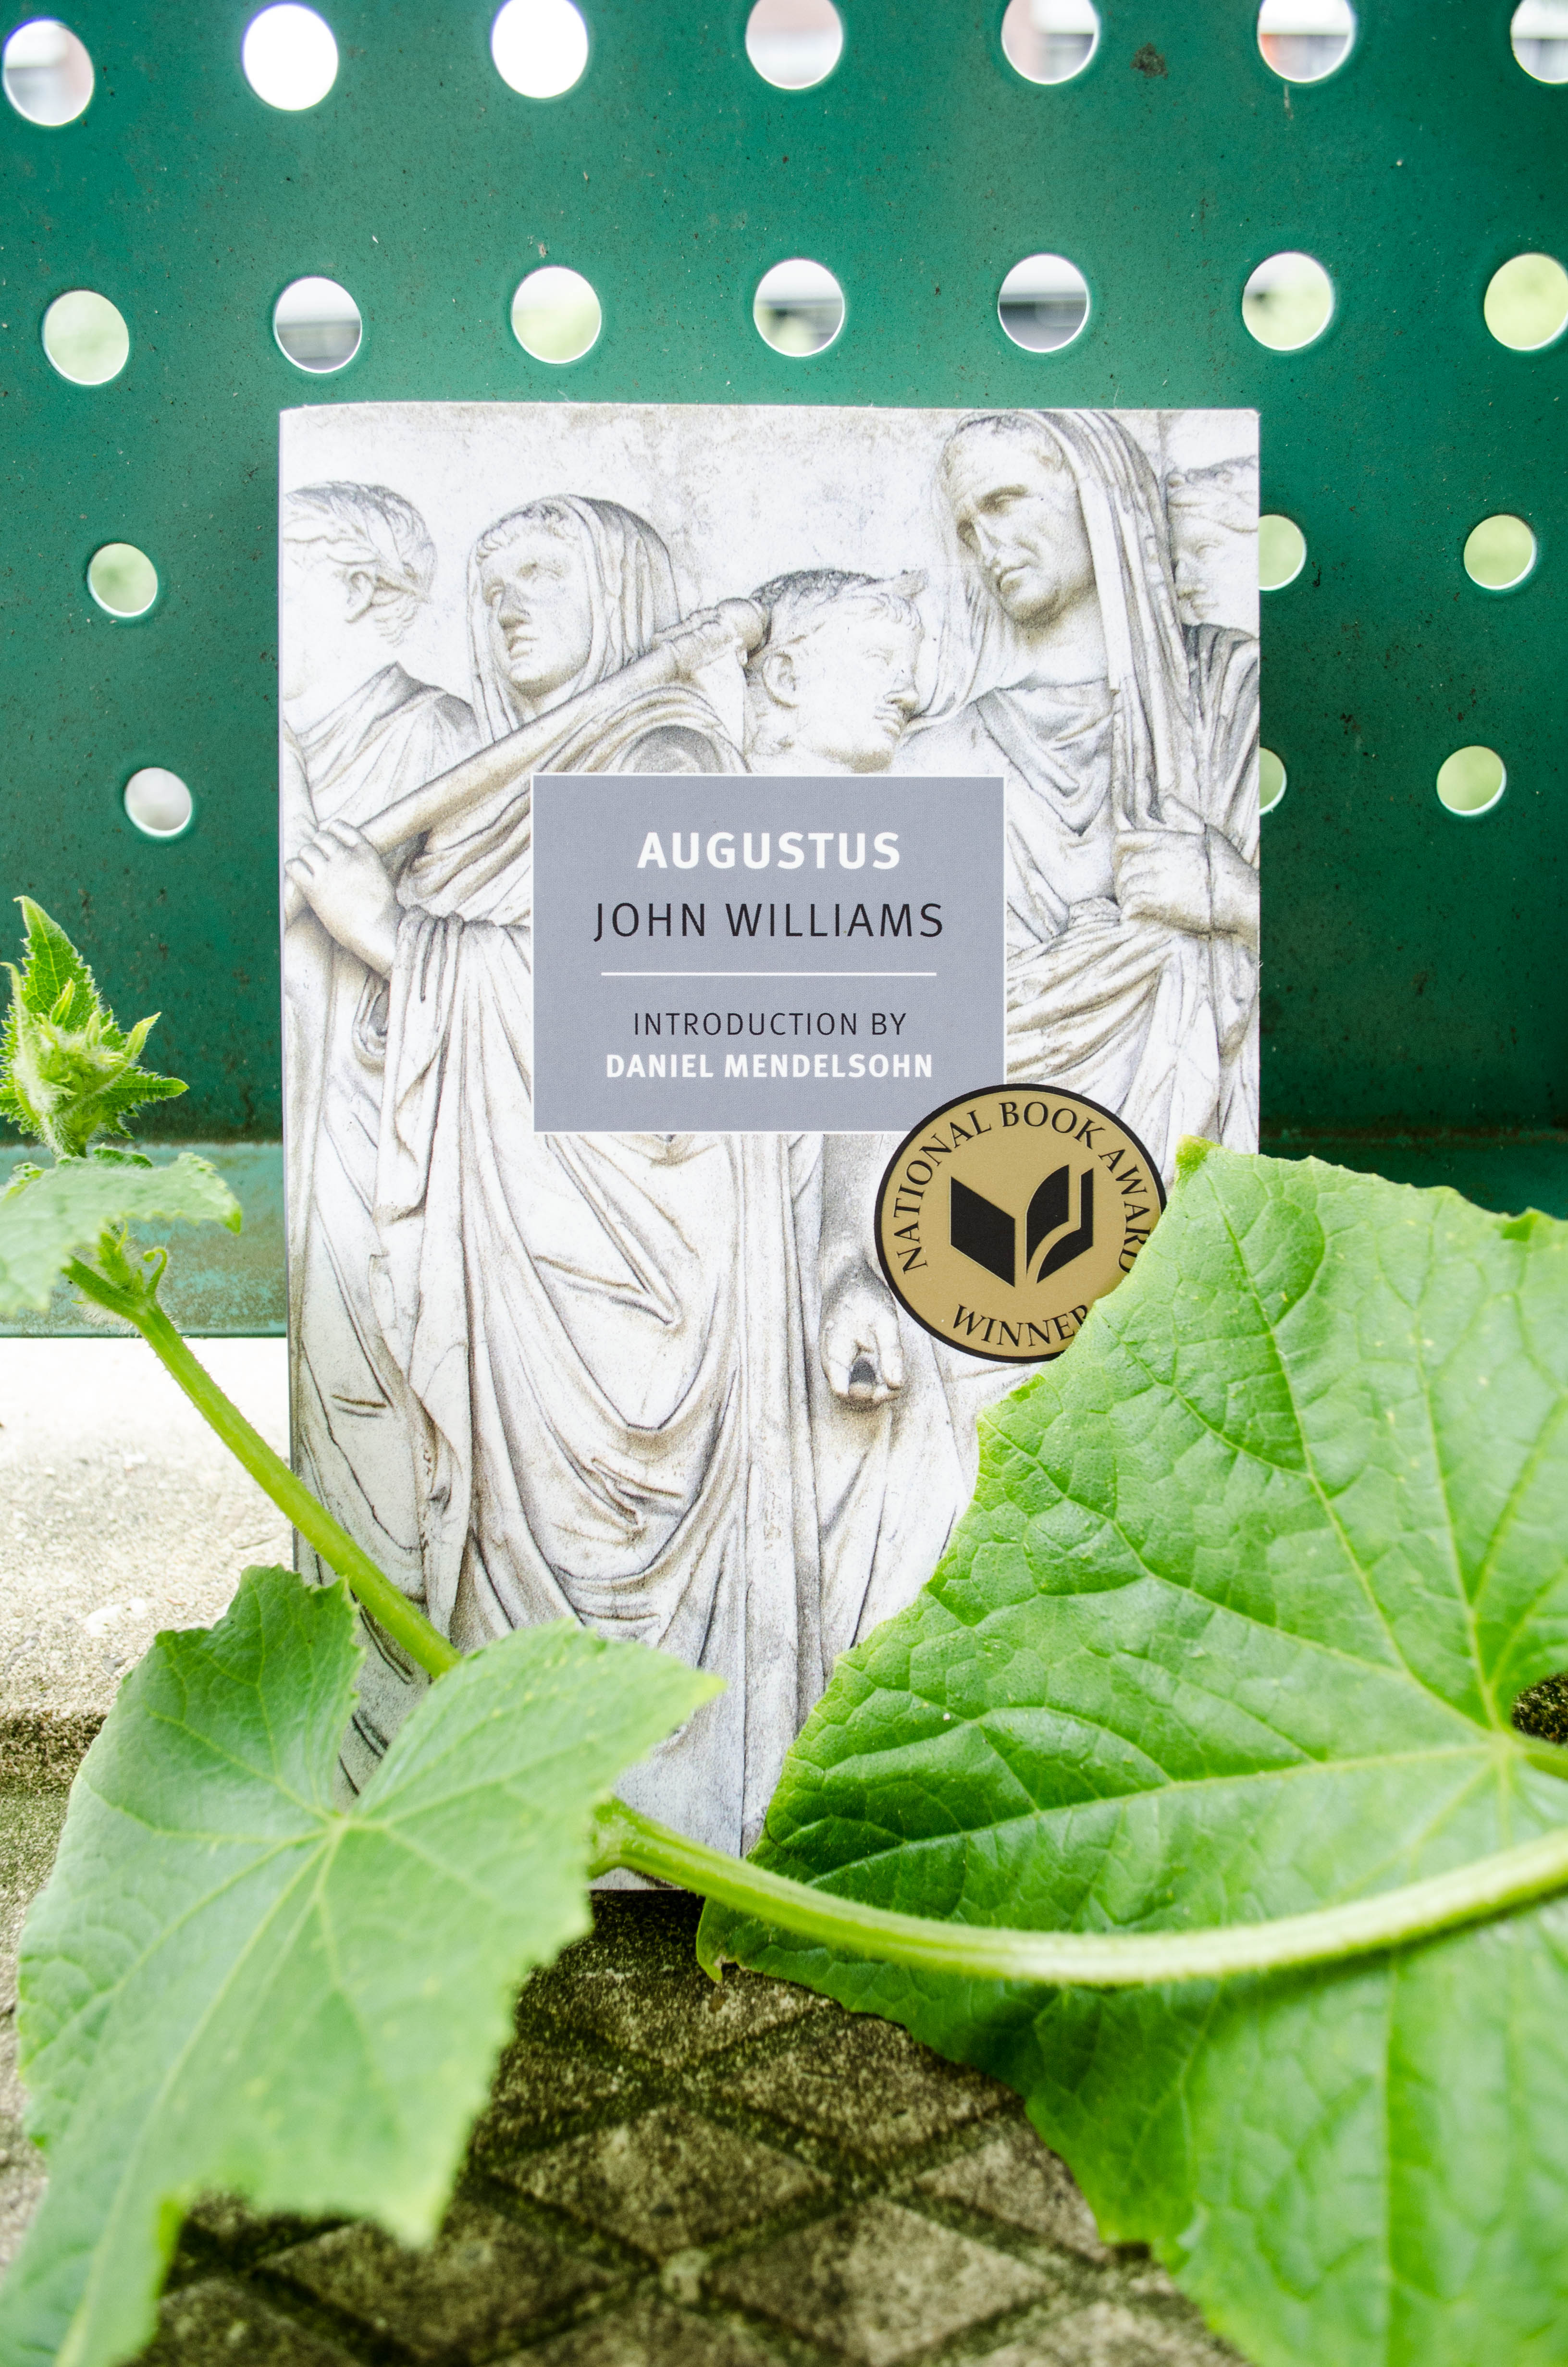 Augustus is a historical fiction novel written in epistolary form by John Williams, telling the story of Rome's first emperor